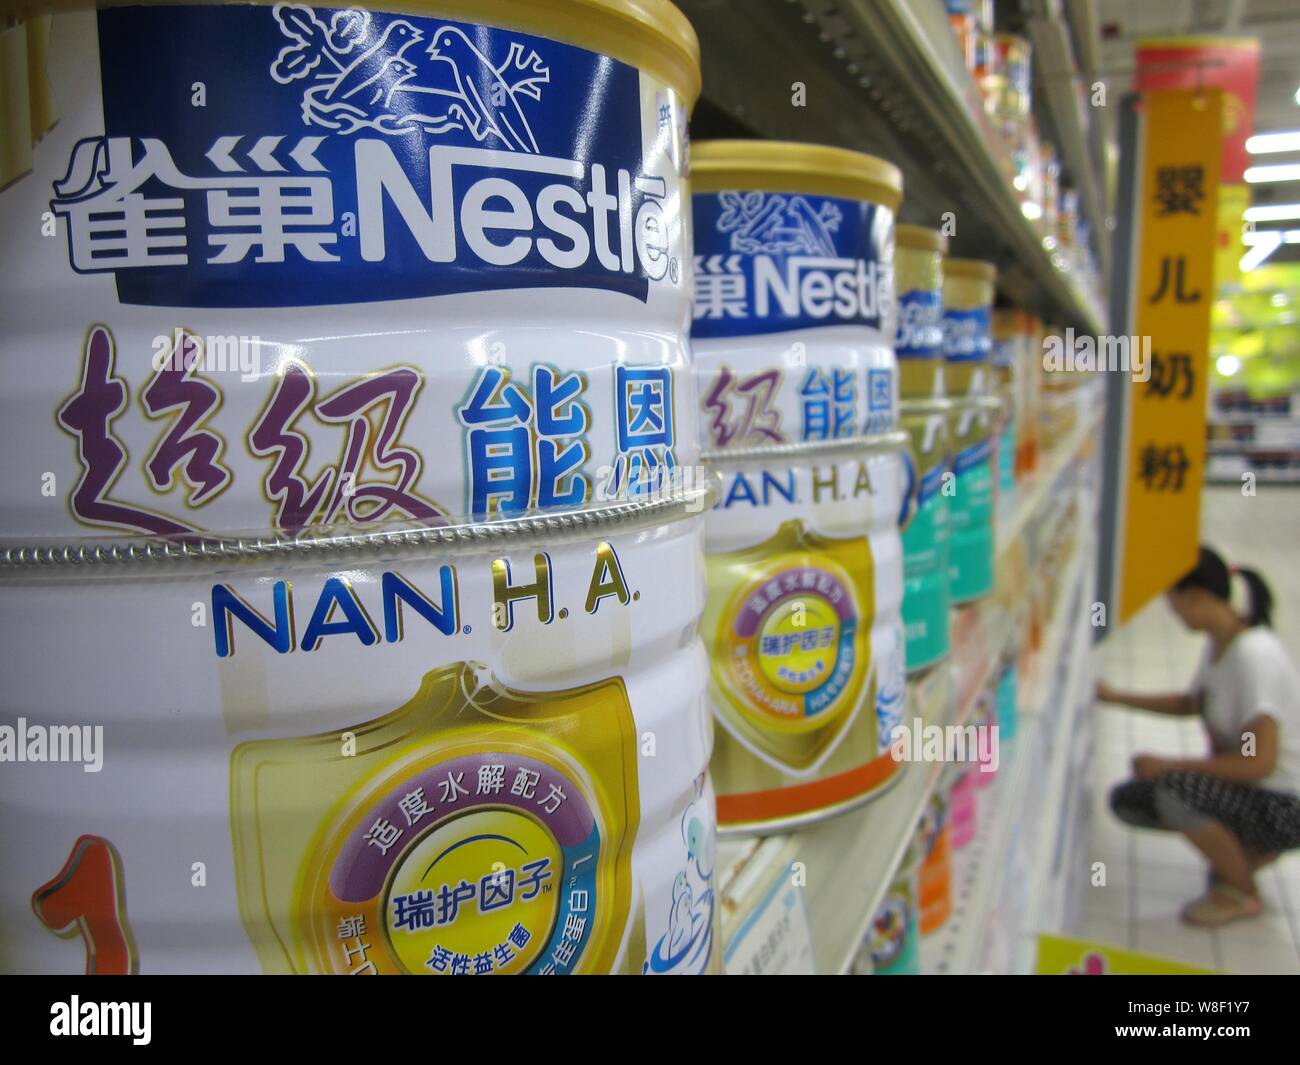 --FILE--Tins of Nestle milk powder are for sale at a supermarket in Nantong city, east China's Jiangsu province, 19 August 2013.   Swiss firm Nestle, Stock Photo